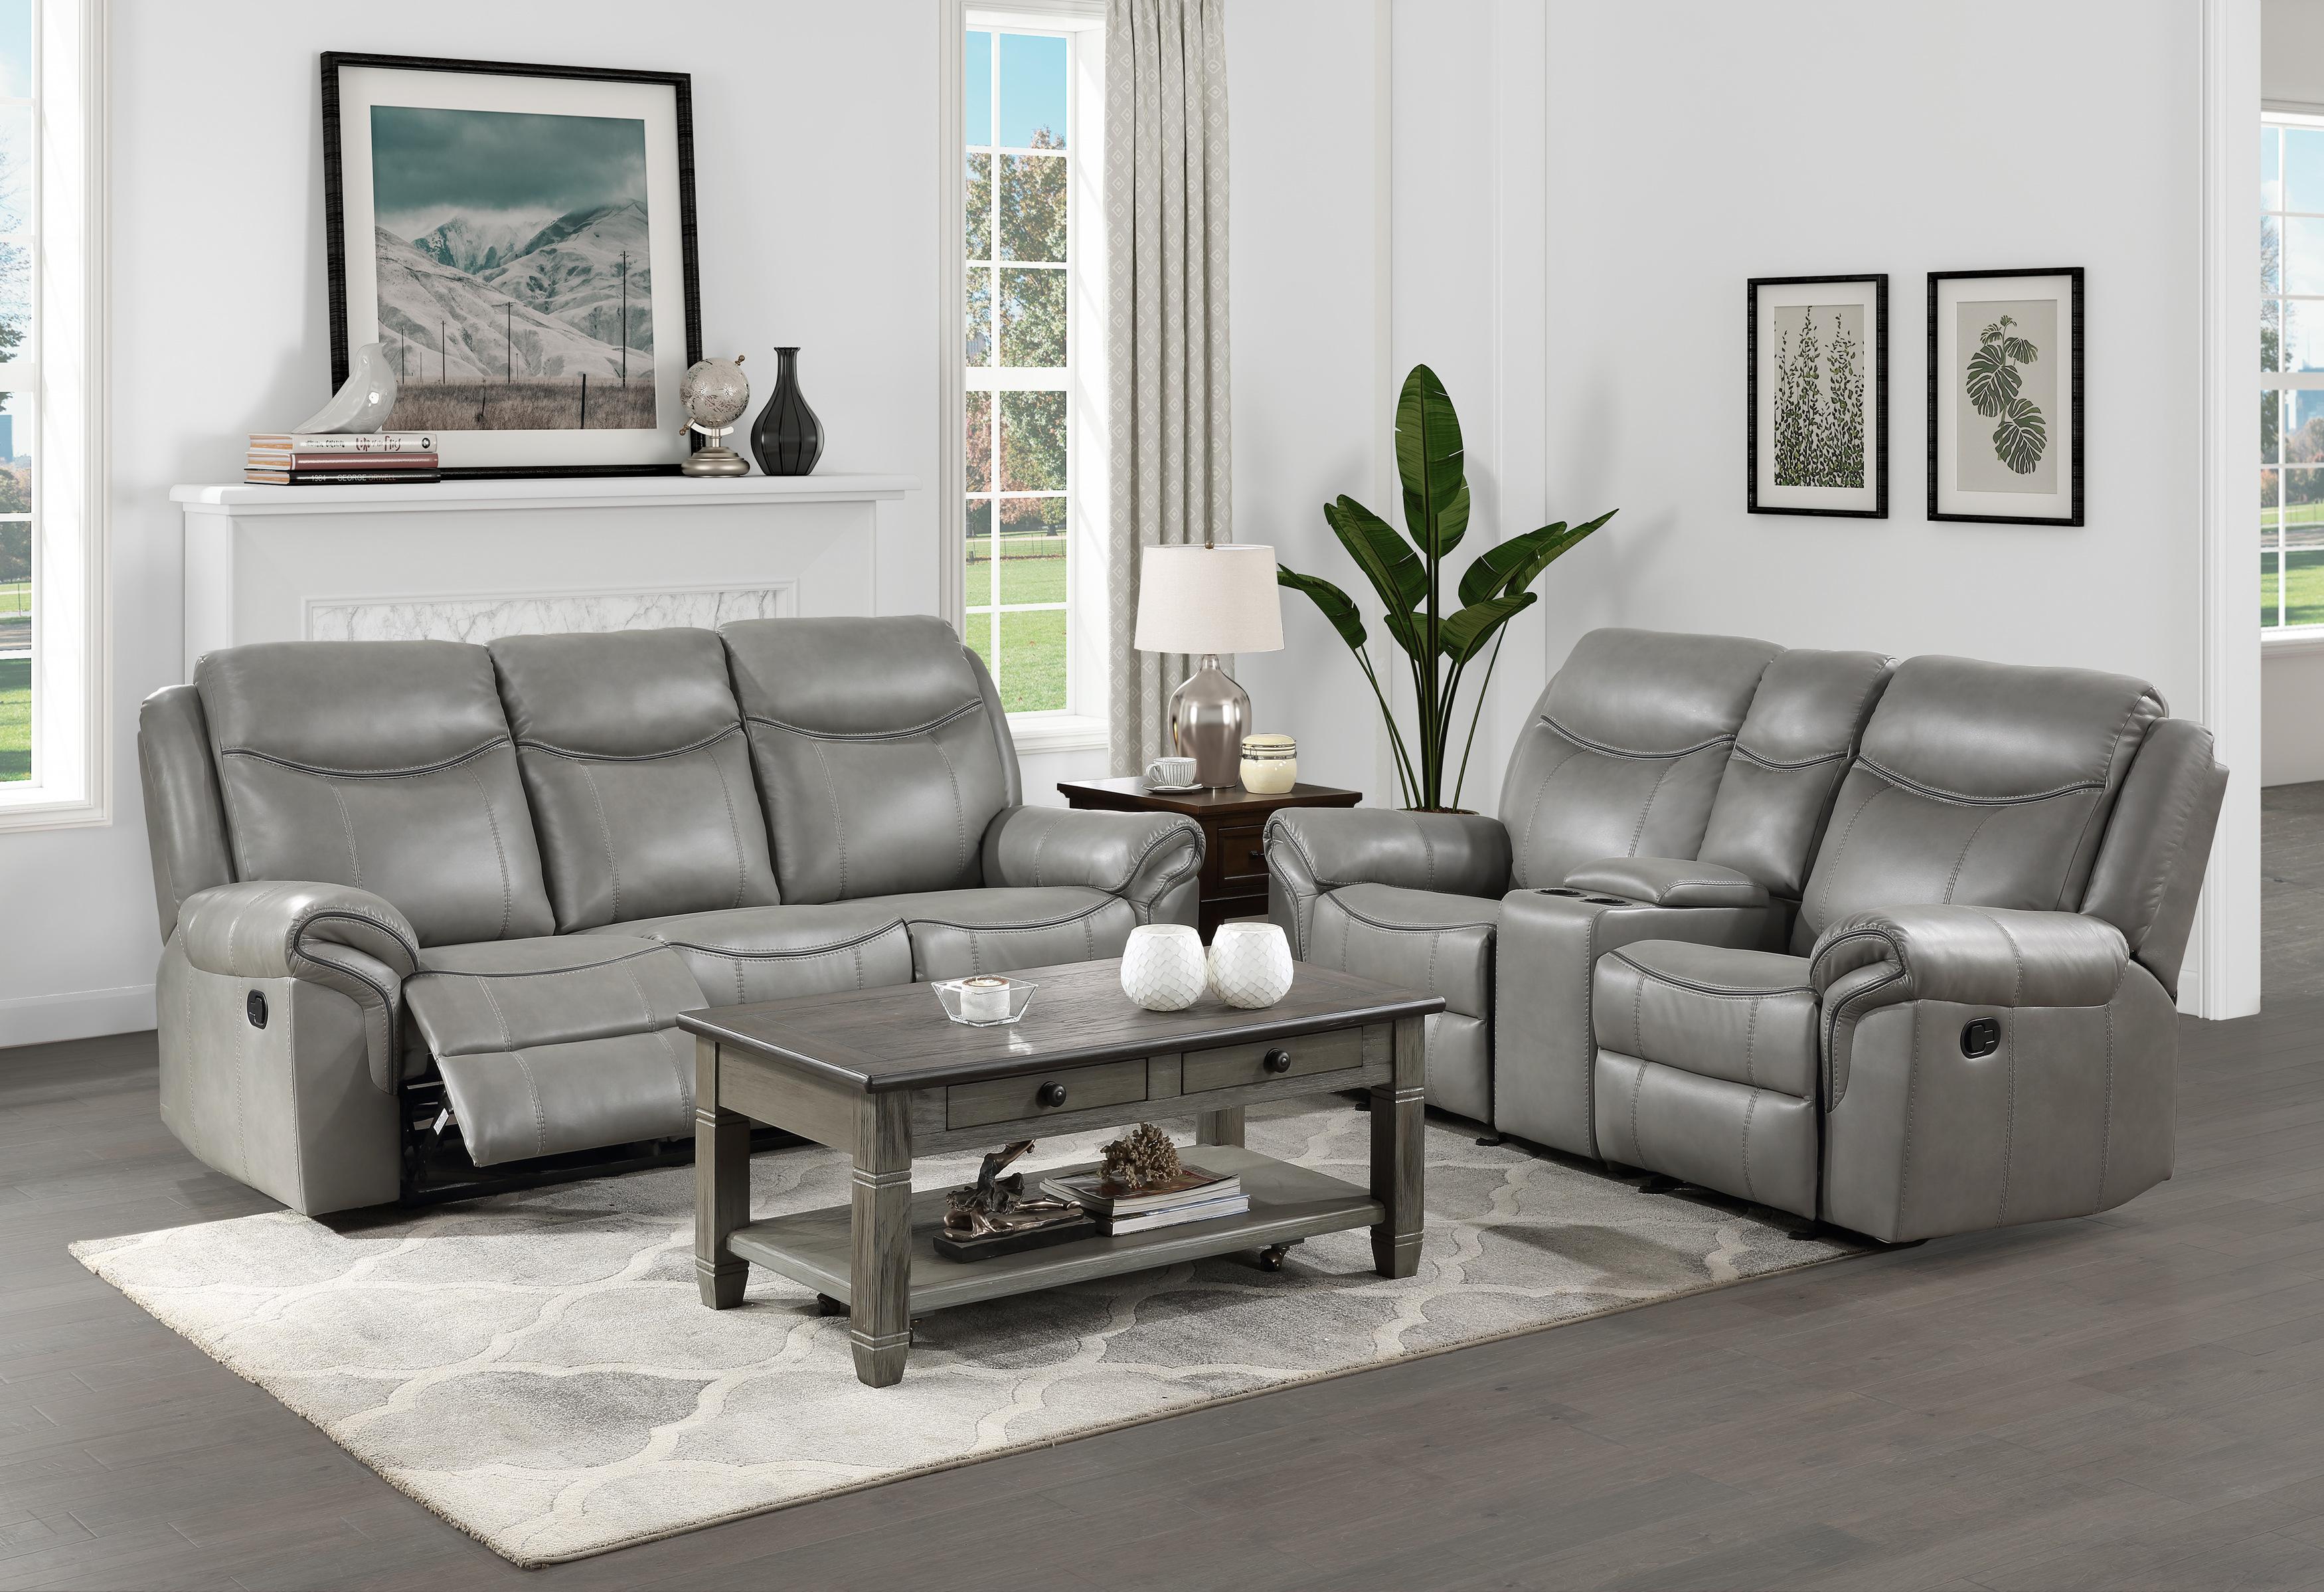 Transitional Reclining Set 8206GRY-2PC Aram 8206GRY-2PC in Gray Faux Leather